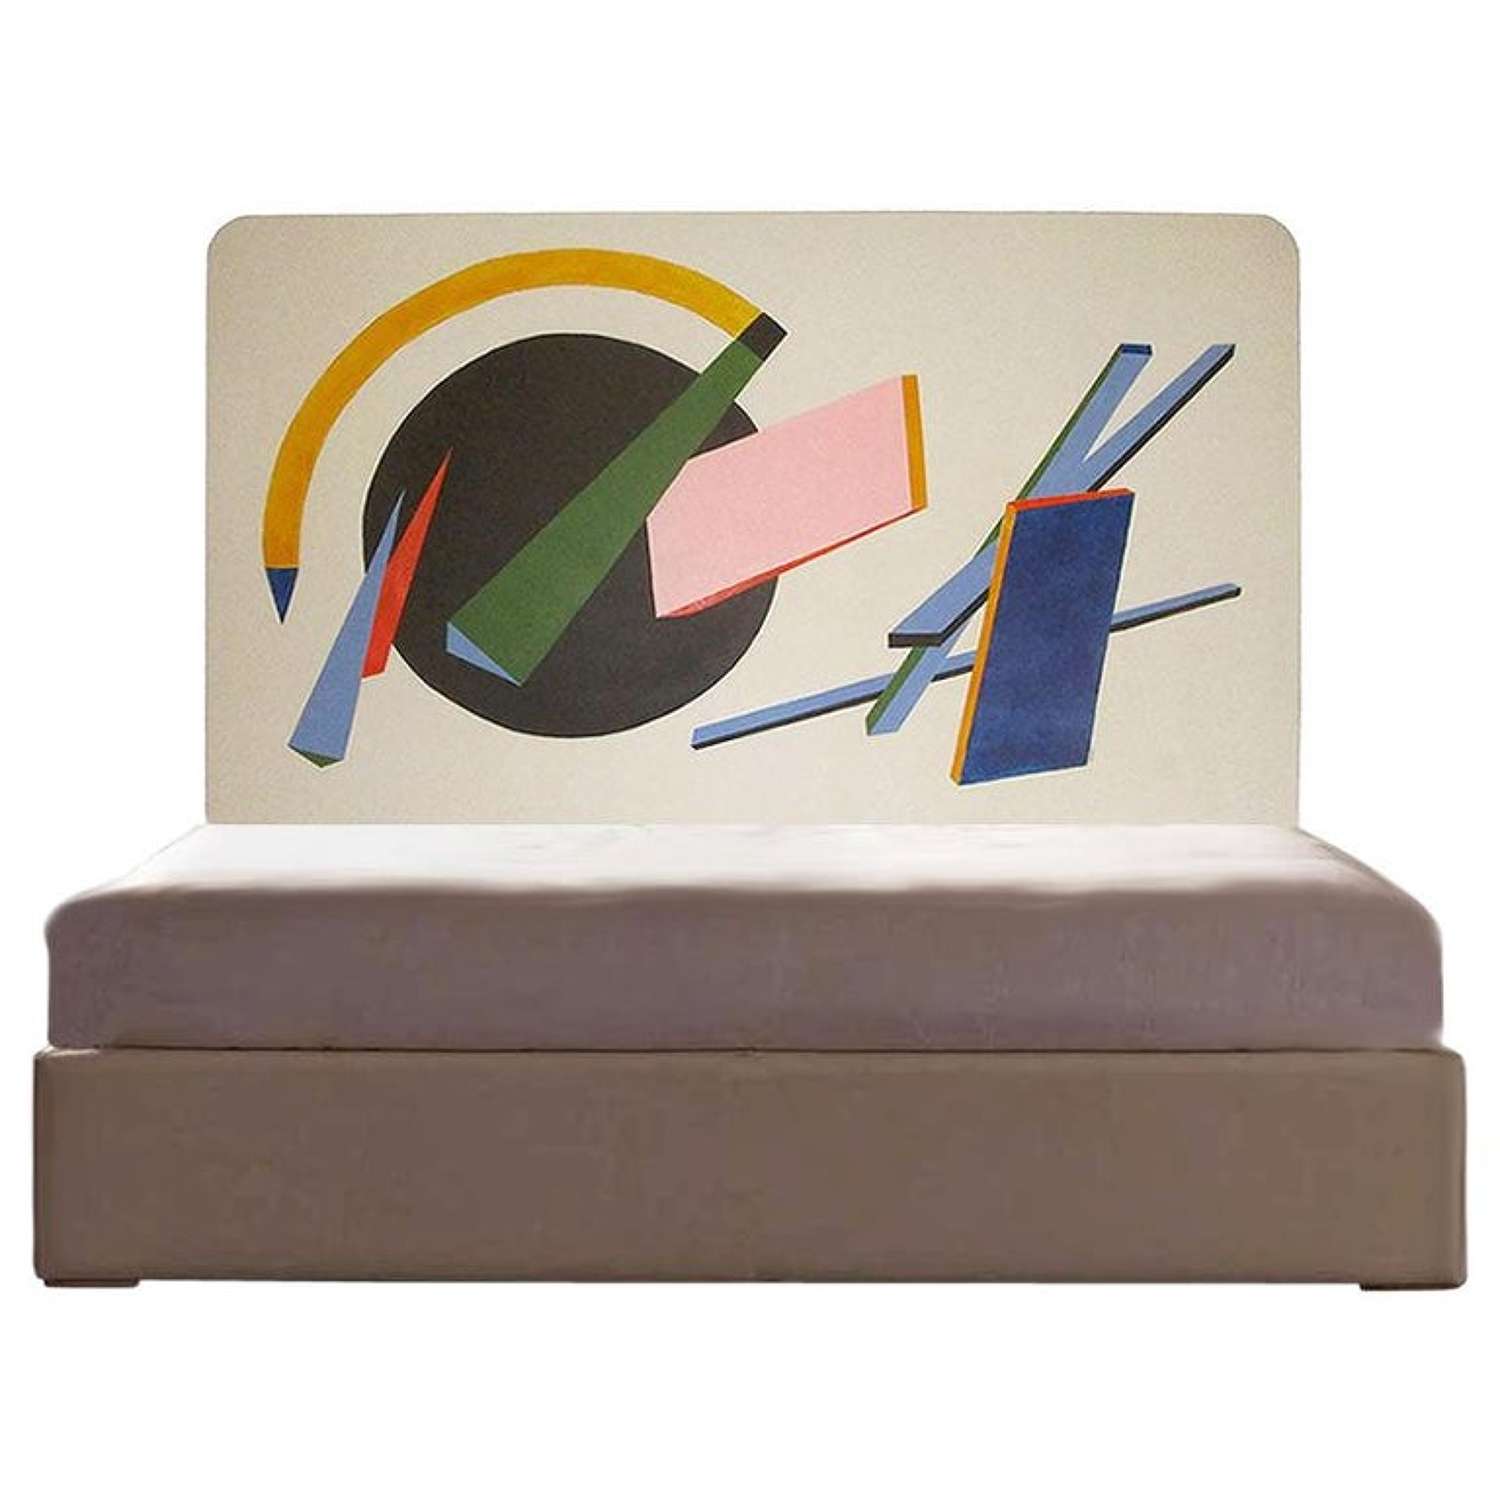 French Bed Headboard Painted by Artist Unique for Midcentury Interior or Loft